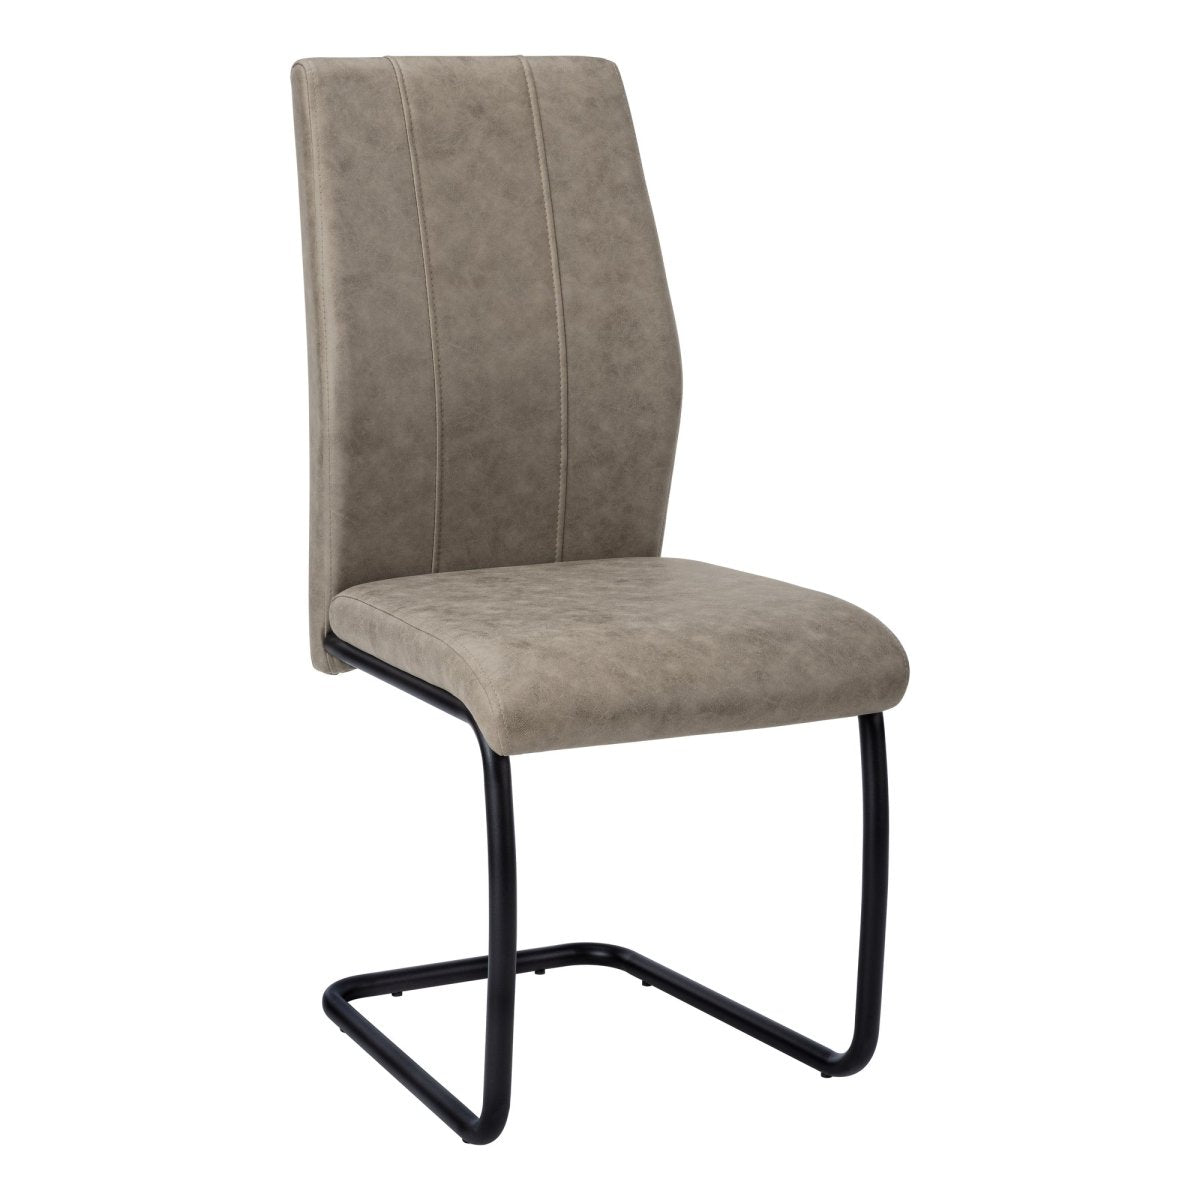 Taupe Upholstered Contemporary dining chair (set of two) - Rustic Furniture Outlet